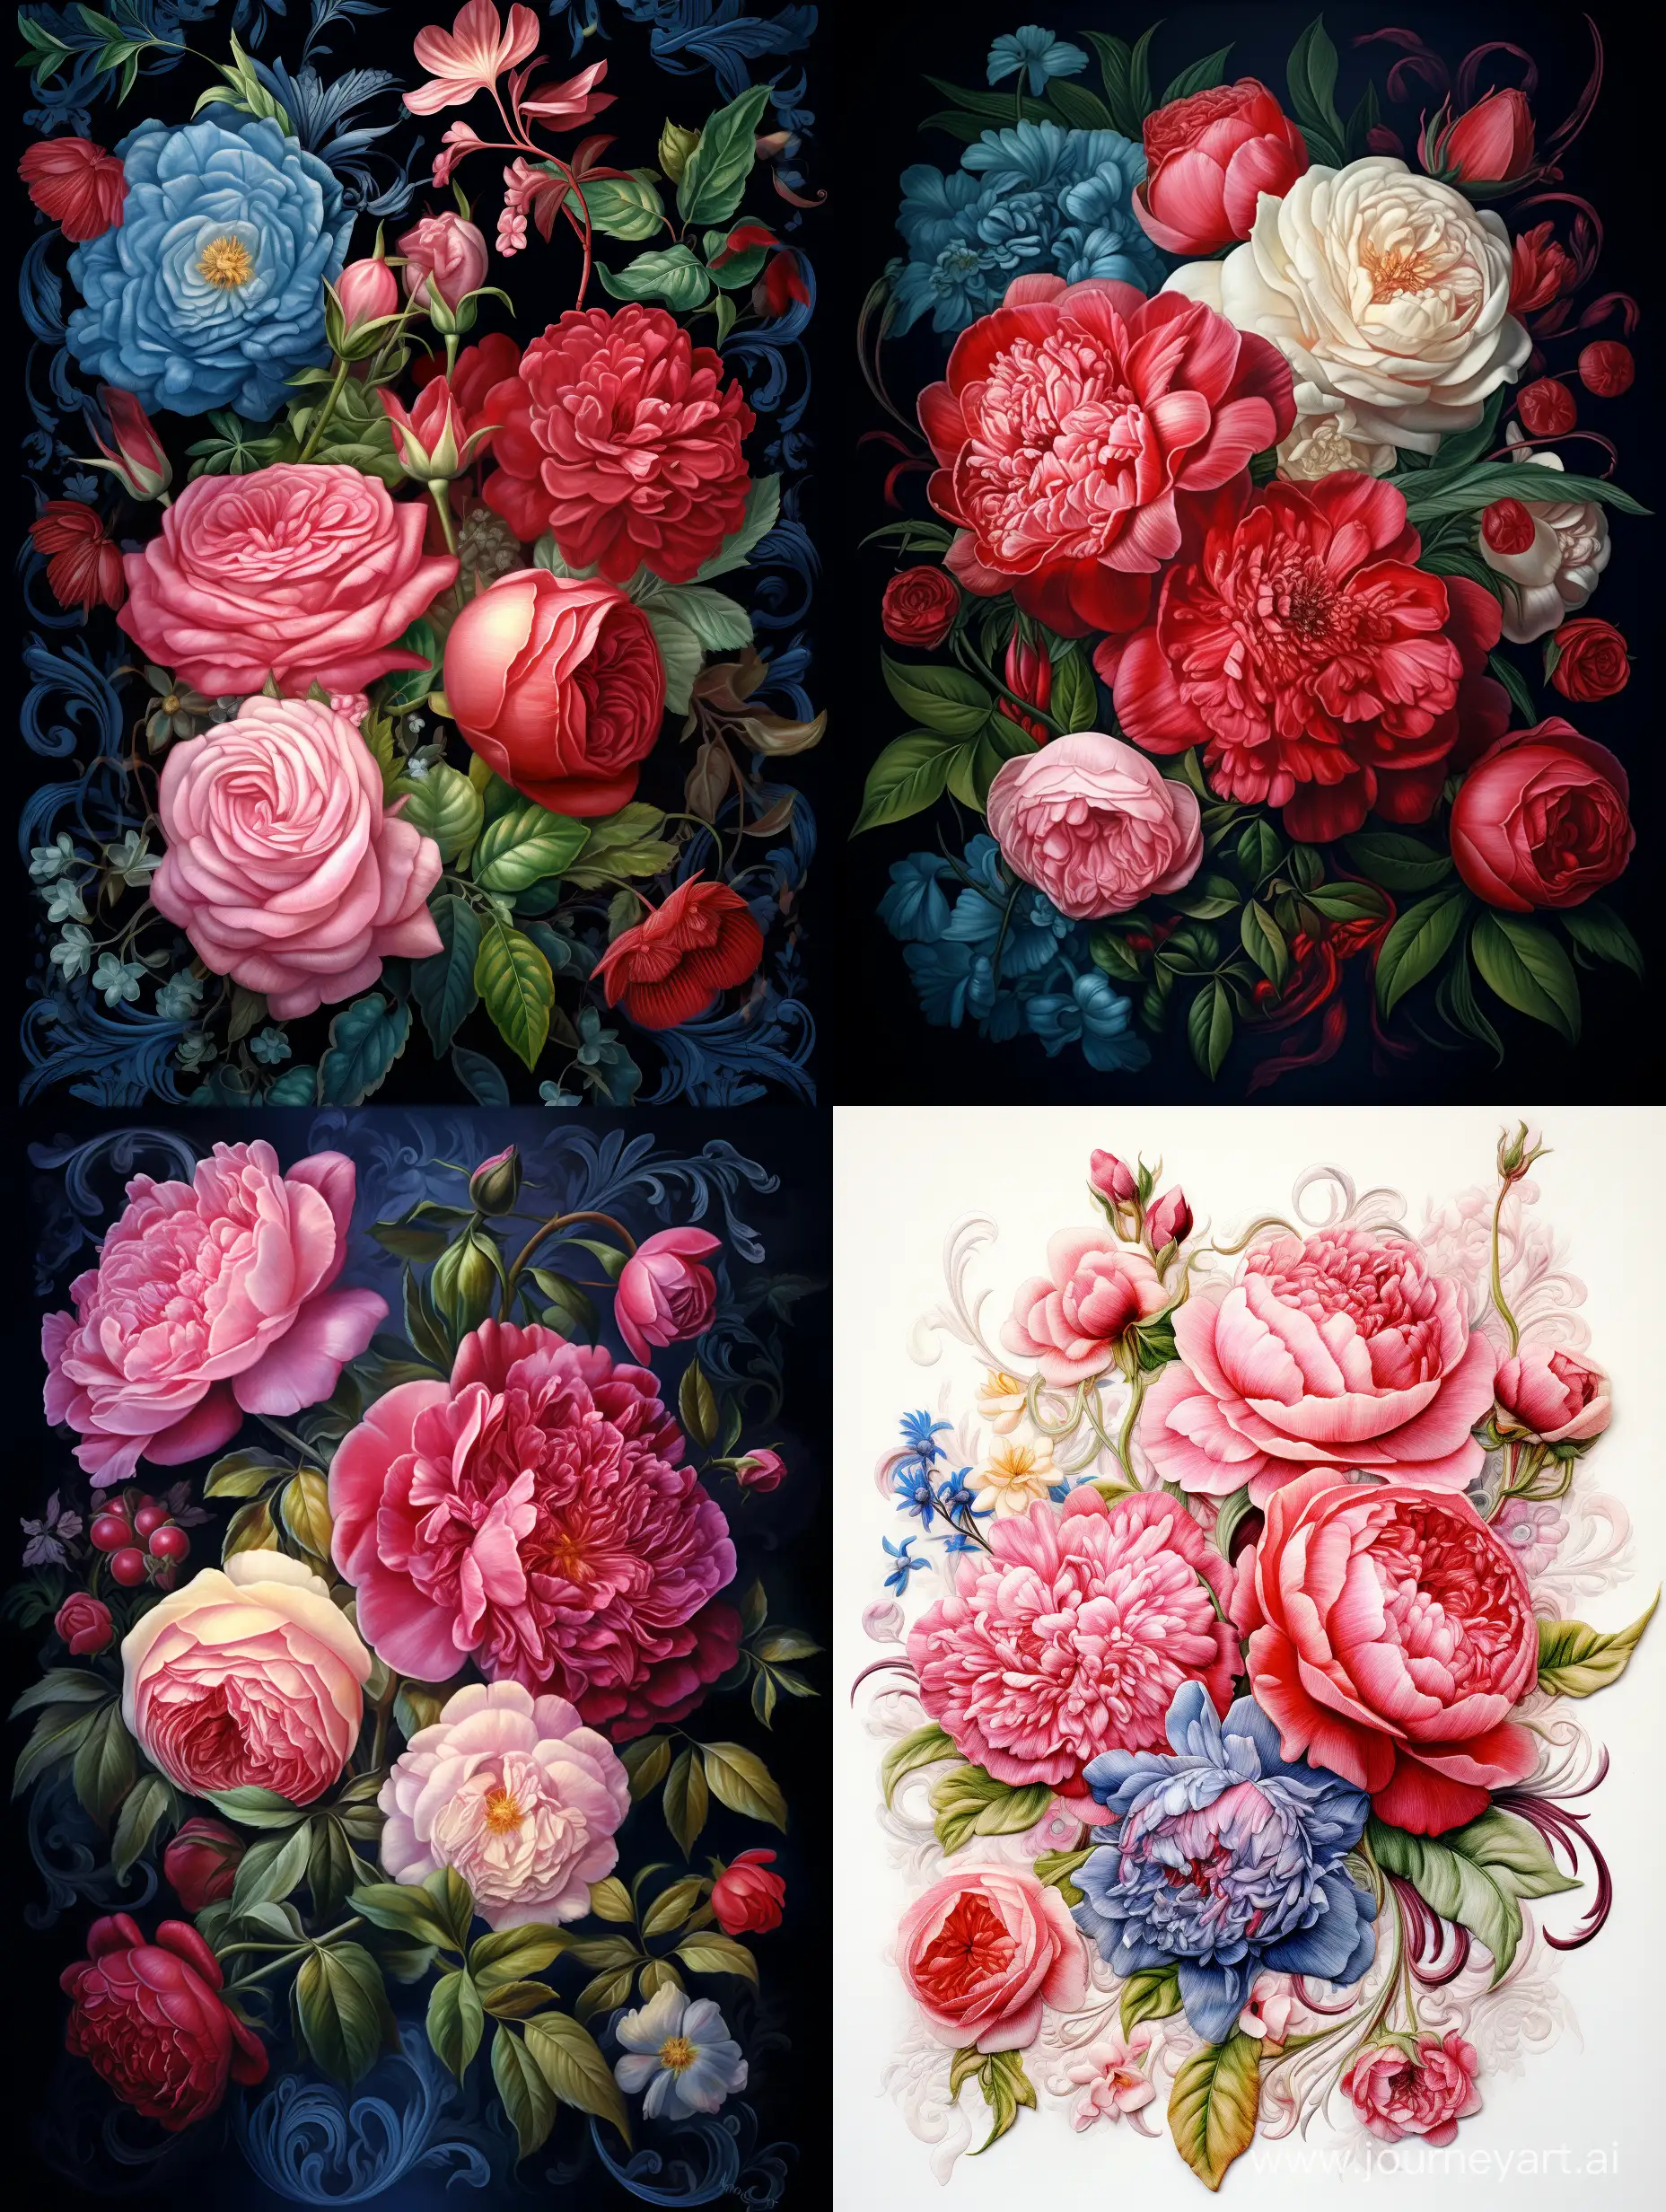 Baroqueinspired-Floating-Peonies-and-Roses-in-Ornate-Floral-Painting